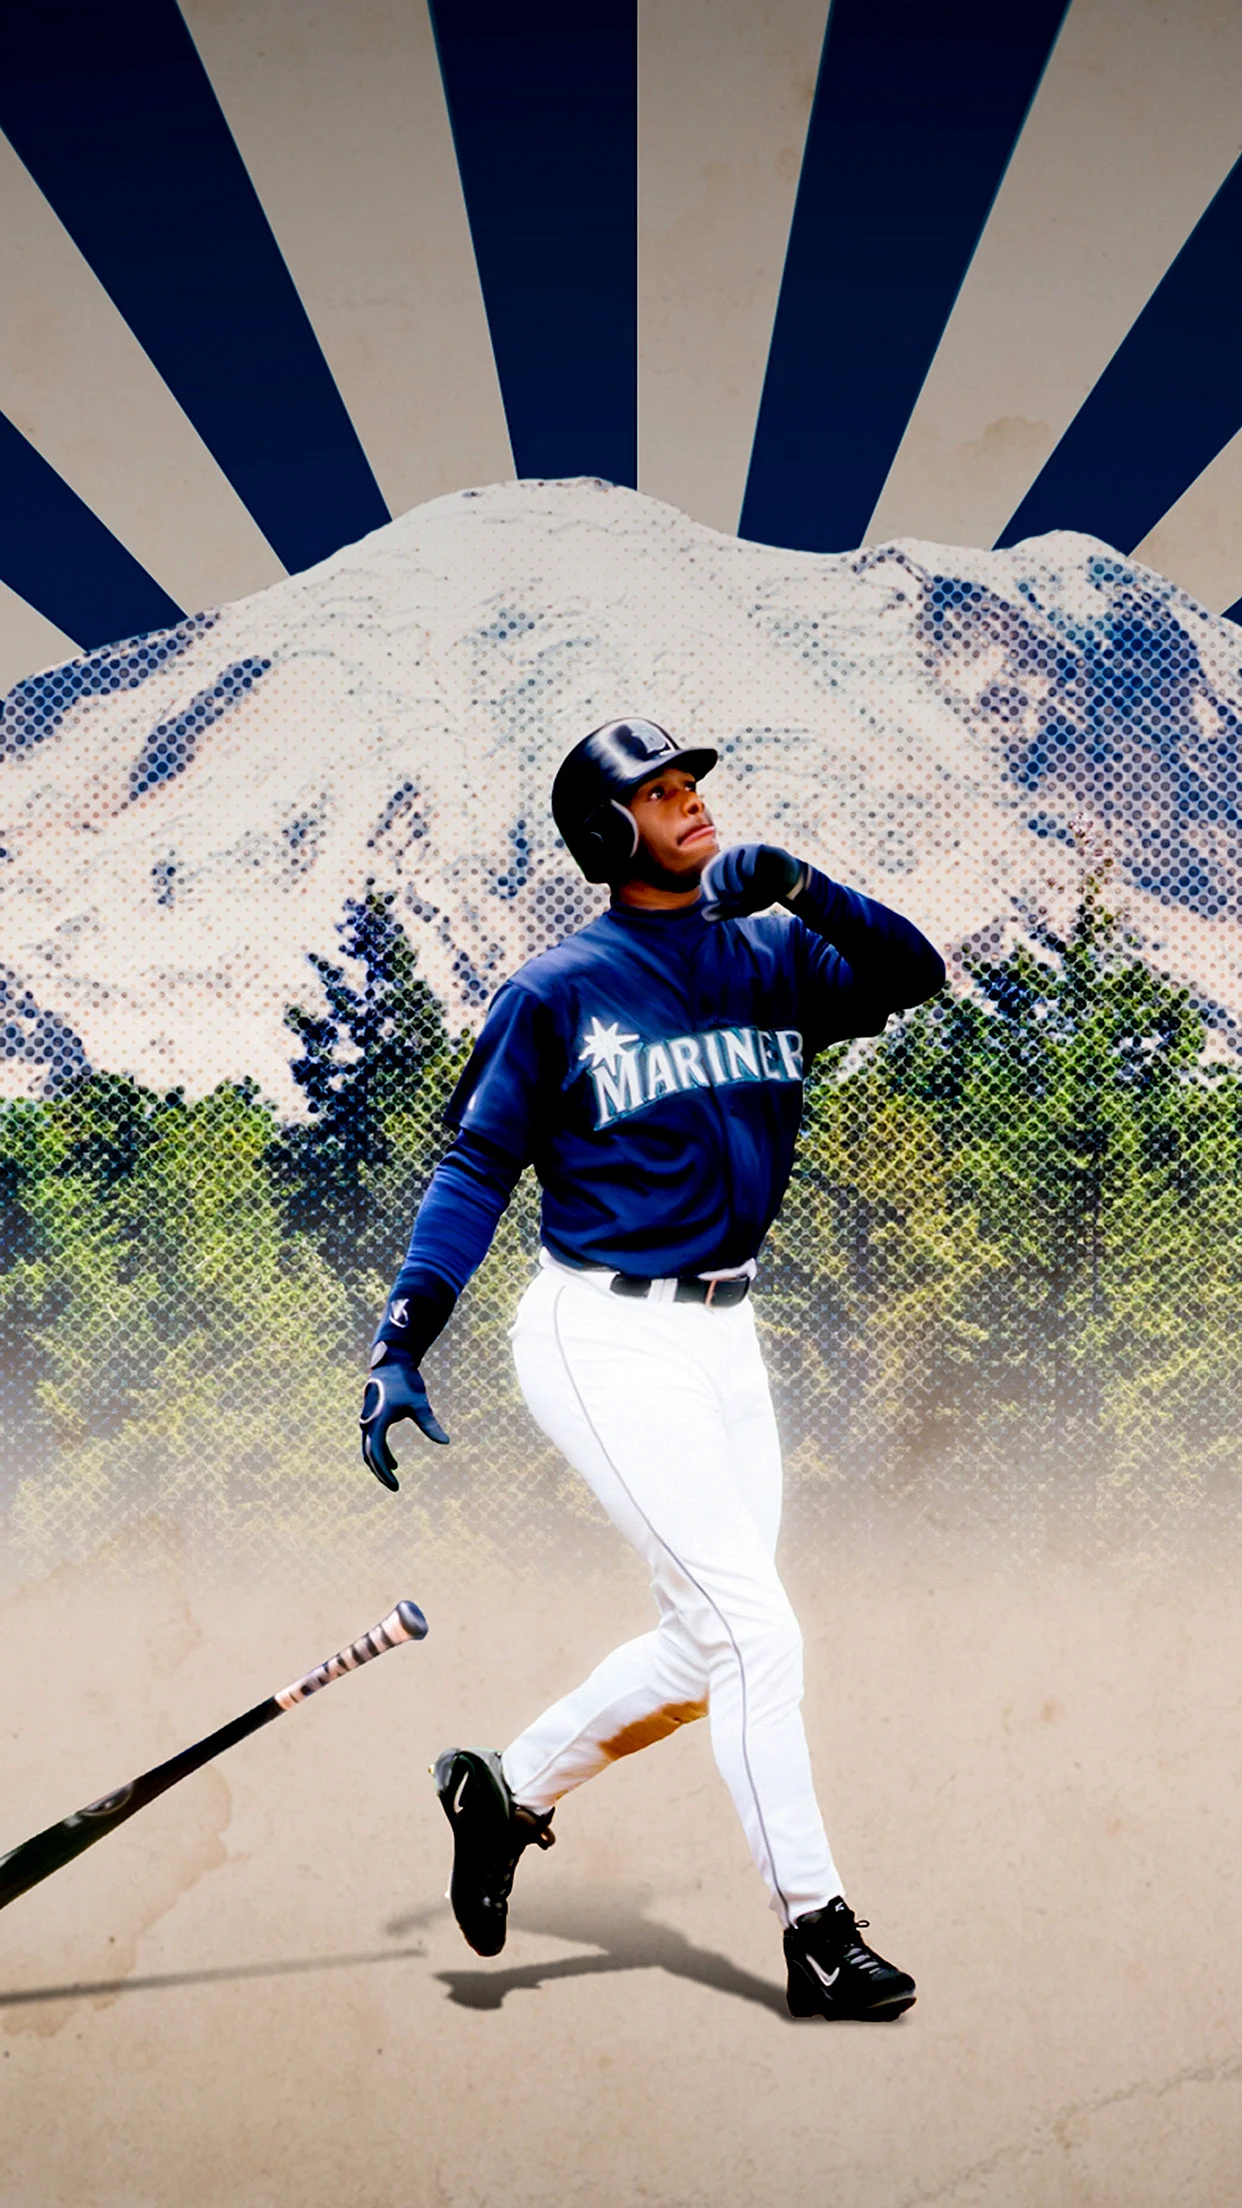 Mariners Wallpaper For iPhone